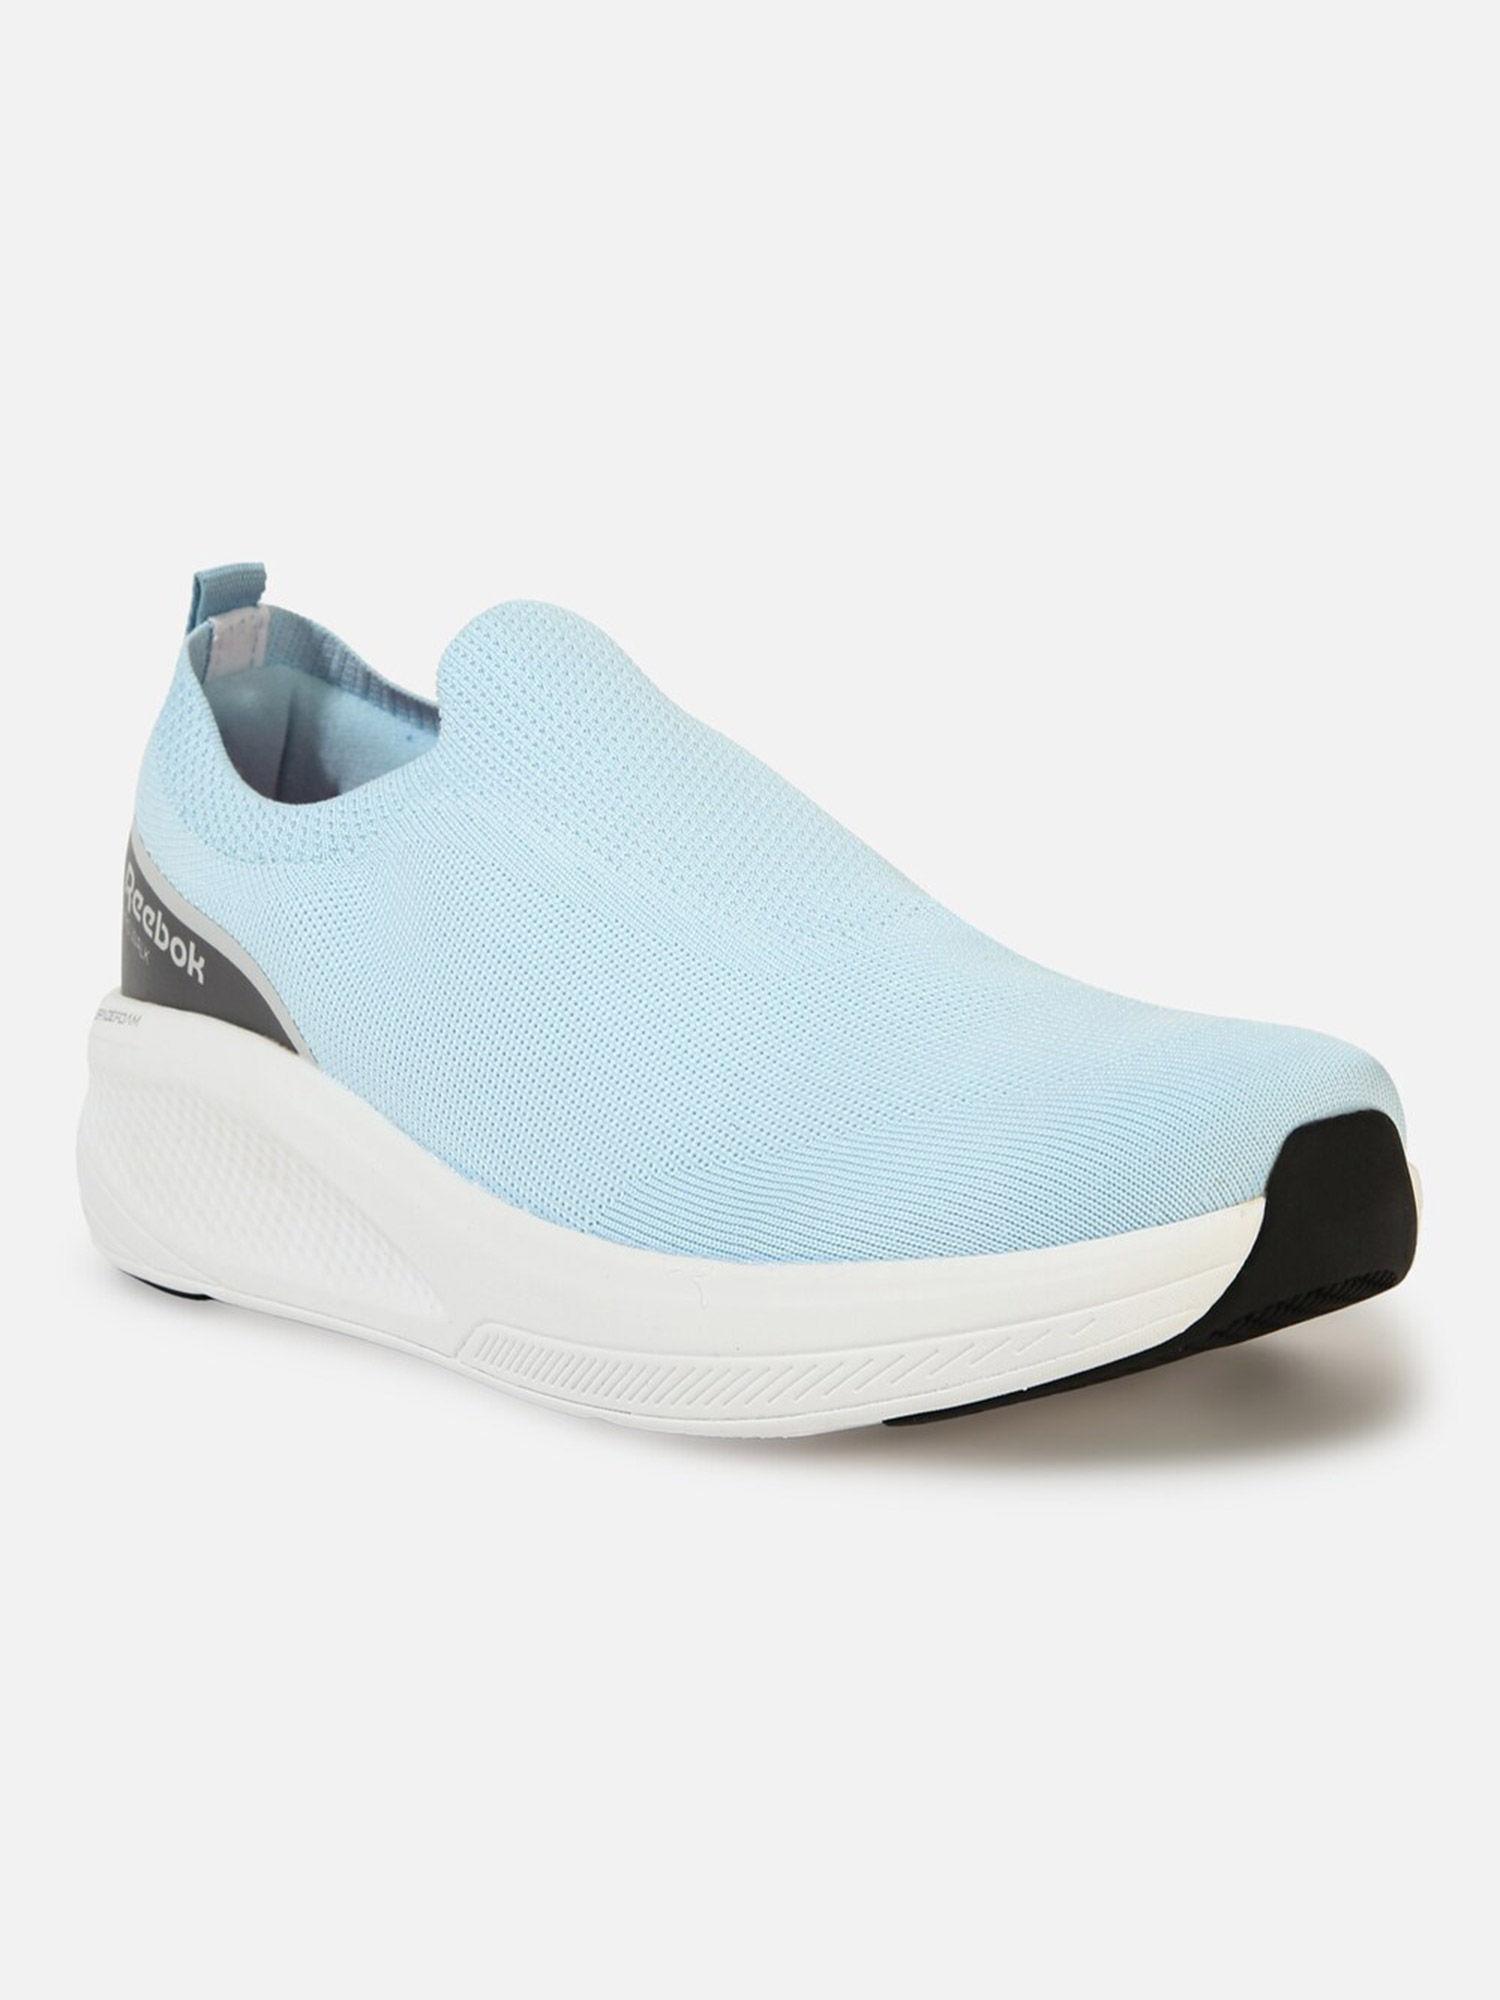 mens soft elevate slip-on casual shoes space foam